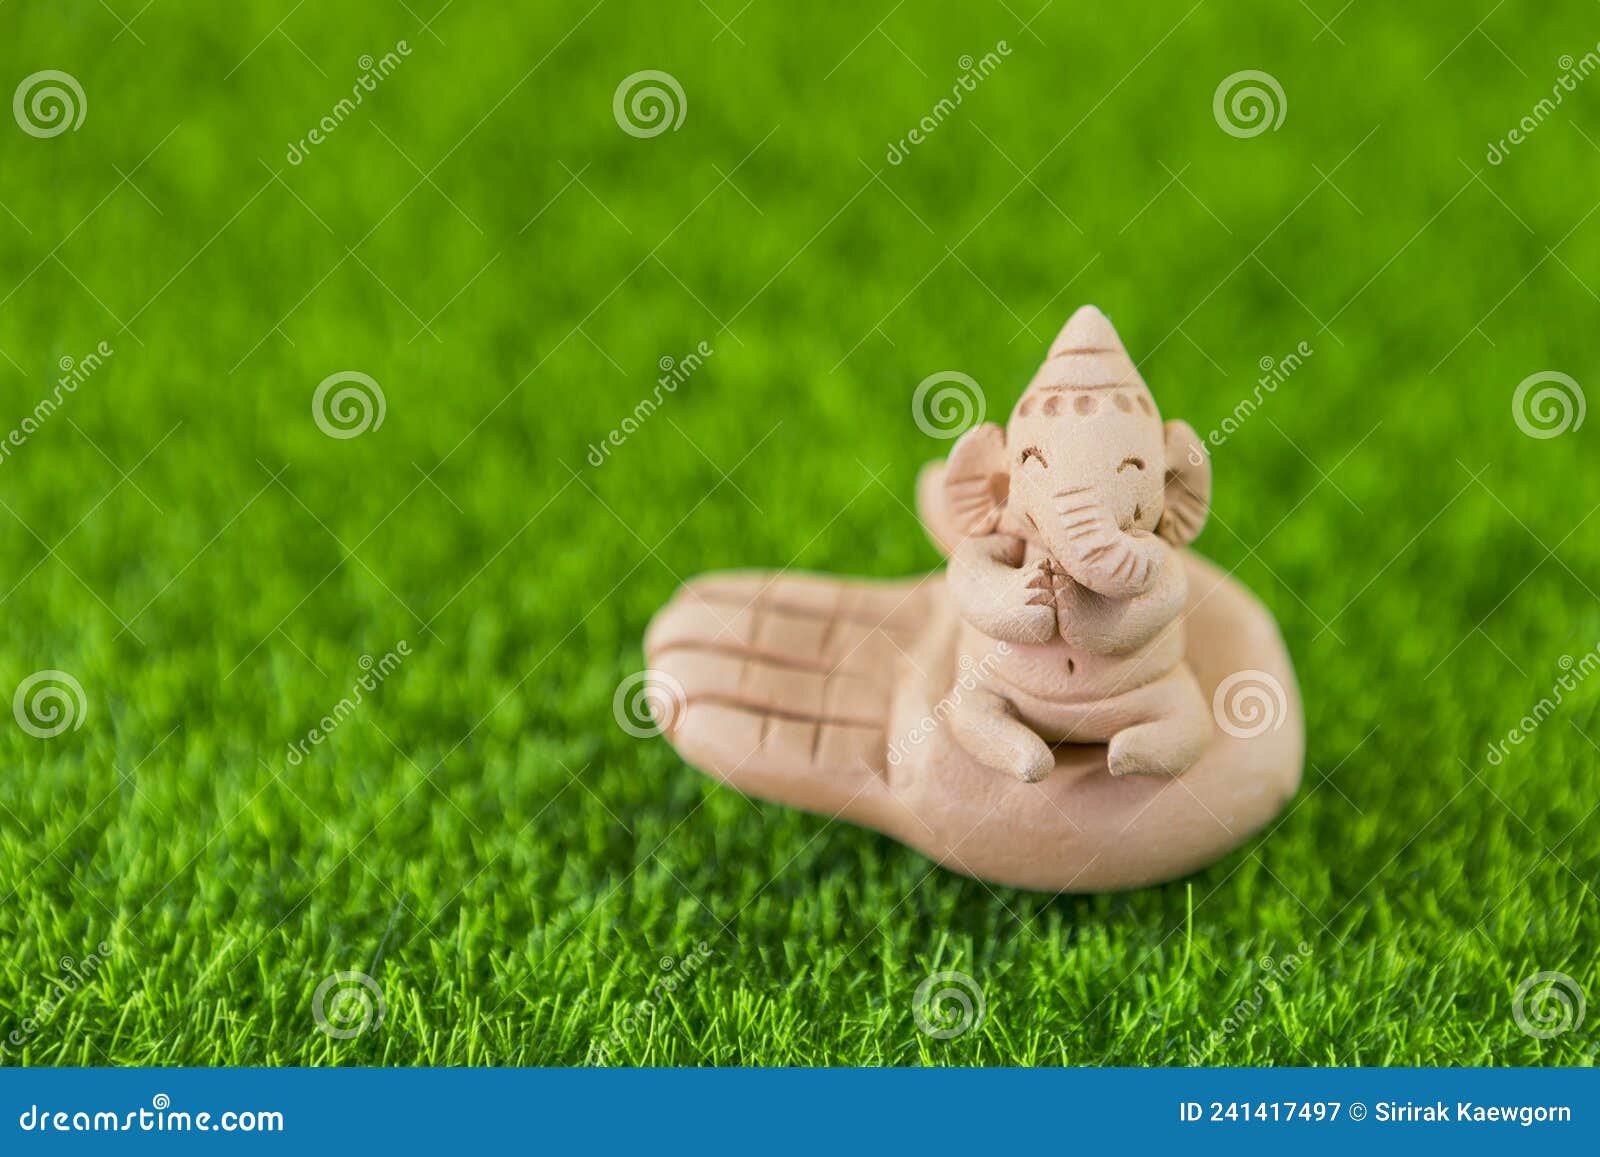 Little Ganesha on Hand on Green Grass Background, Elephant Clay ...